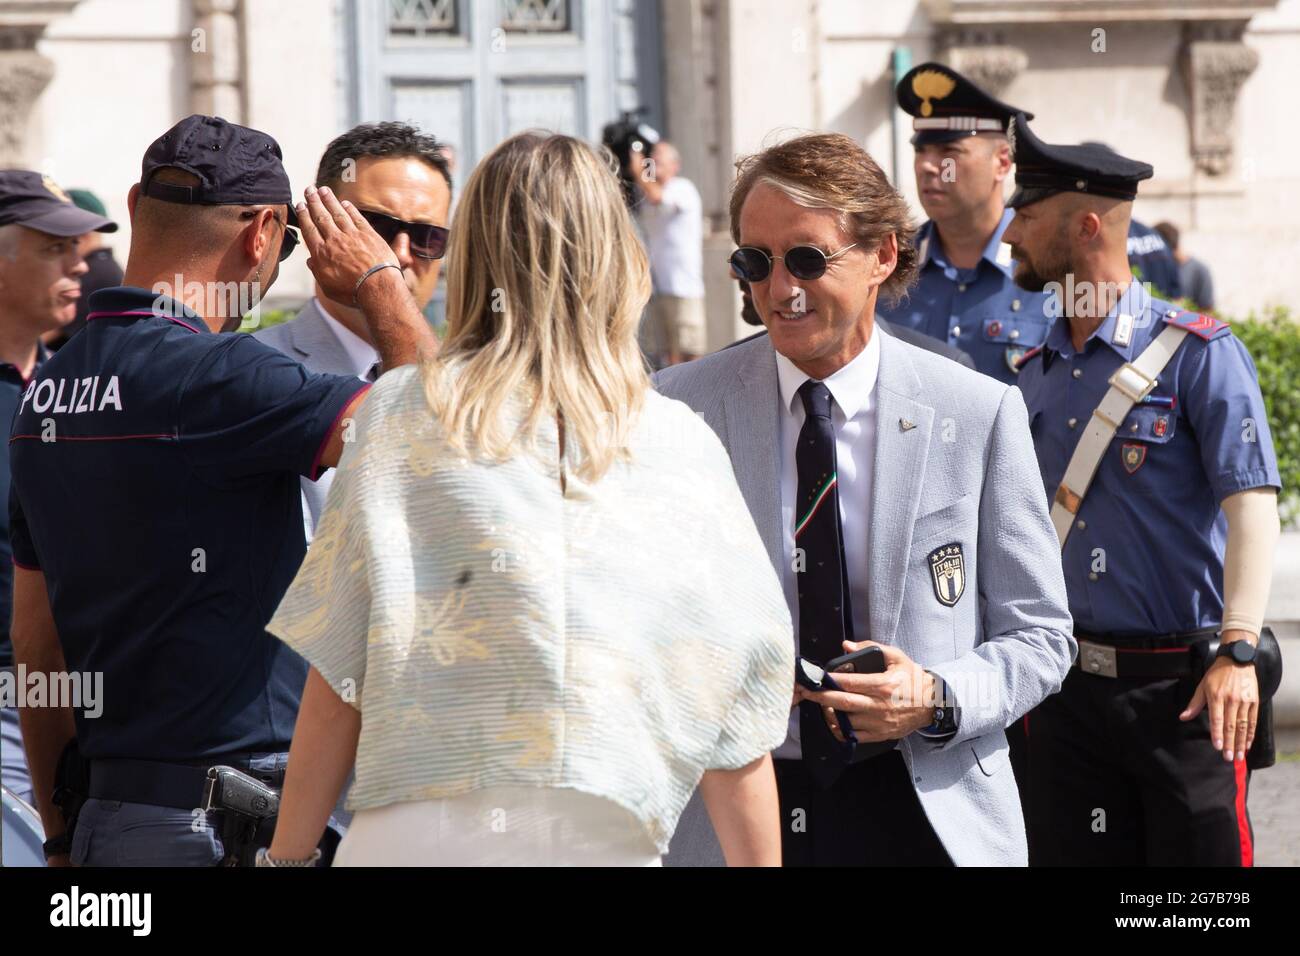 Rome, Italy. 12th July, 2021. Roberto Mancinithe player of the Italian National Football Team enter the Quirinal Palace in Rome to visit the President of the Republic Sergio Mattarella after the victory of the European Football Championships, raising the cup won to the sky. The Italian tennis player Matteo Berrettini, finalist at the Wimbledon tournament, also attended the ceremony (Photo by Matteo Nardone/Pacific Press/Sipa USA) Credit: Sipa USA/Alamy Live News Stock Photo